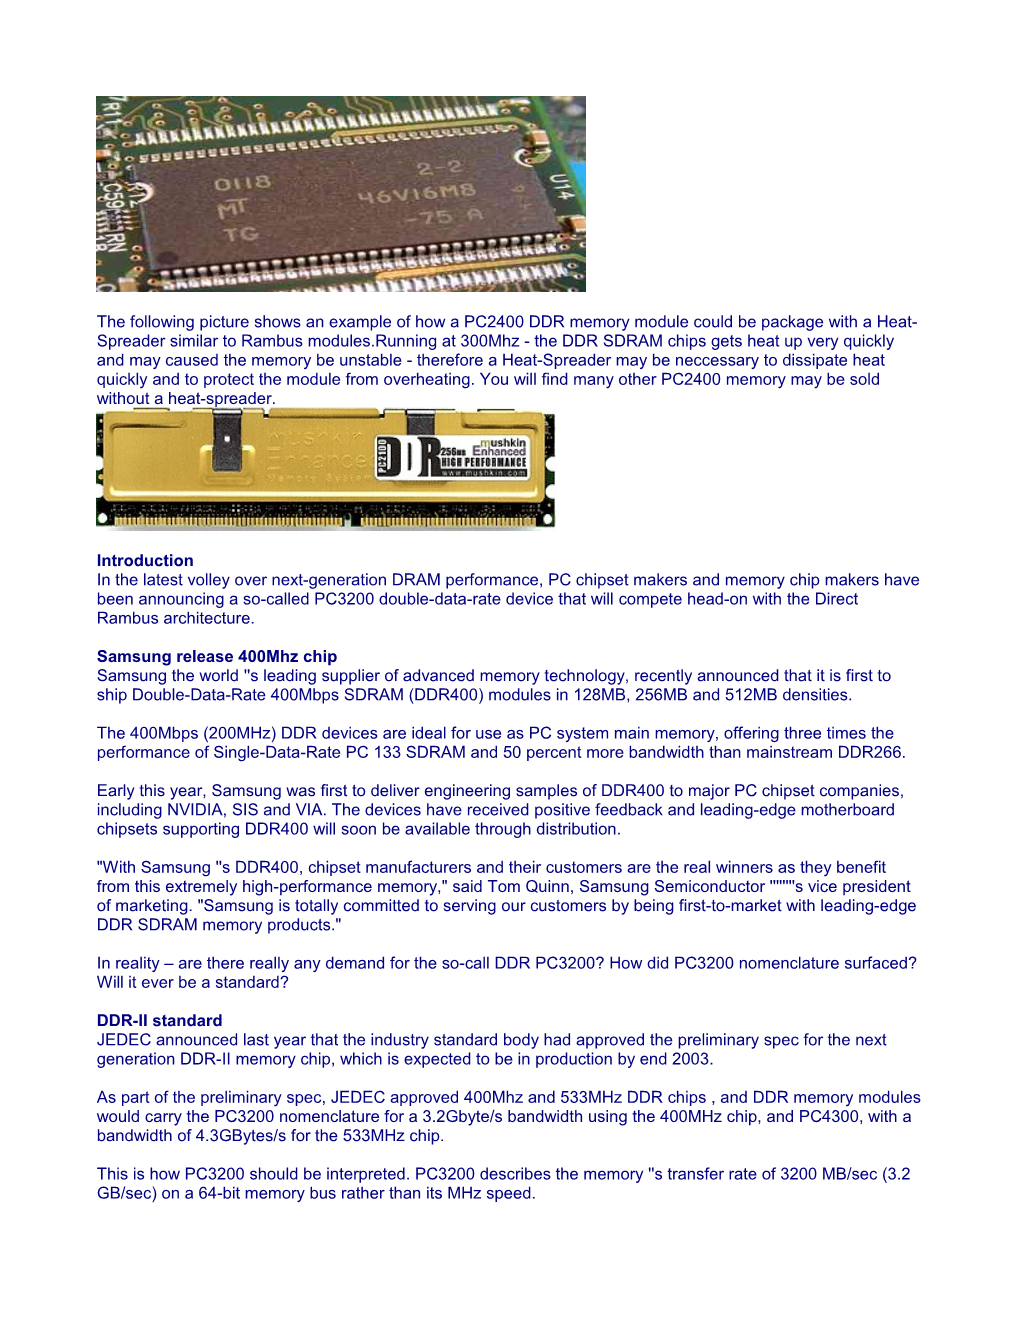 Basics of DDR Memory DDR (Double Data Rate) SDRAM Memory Technology Is a Revolutionary